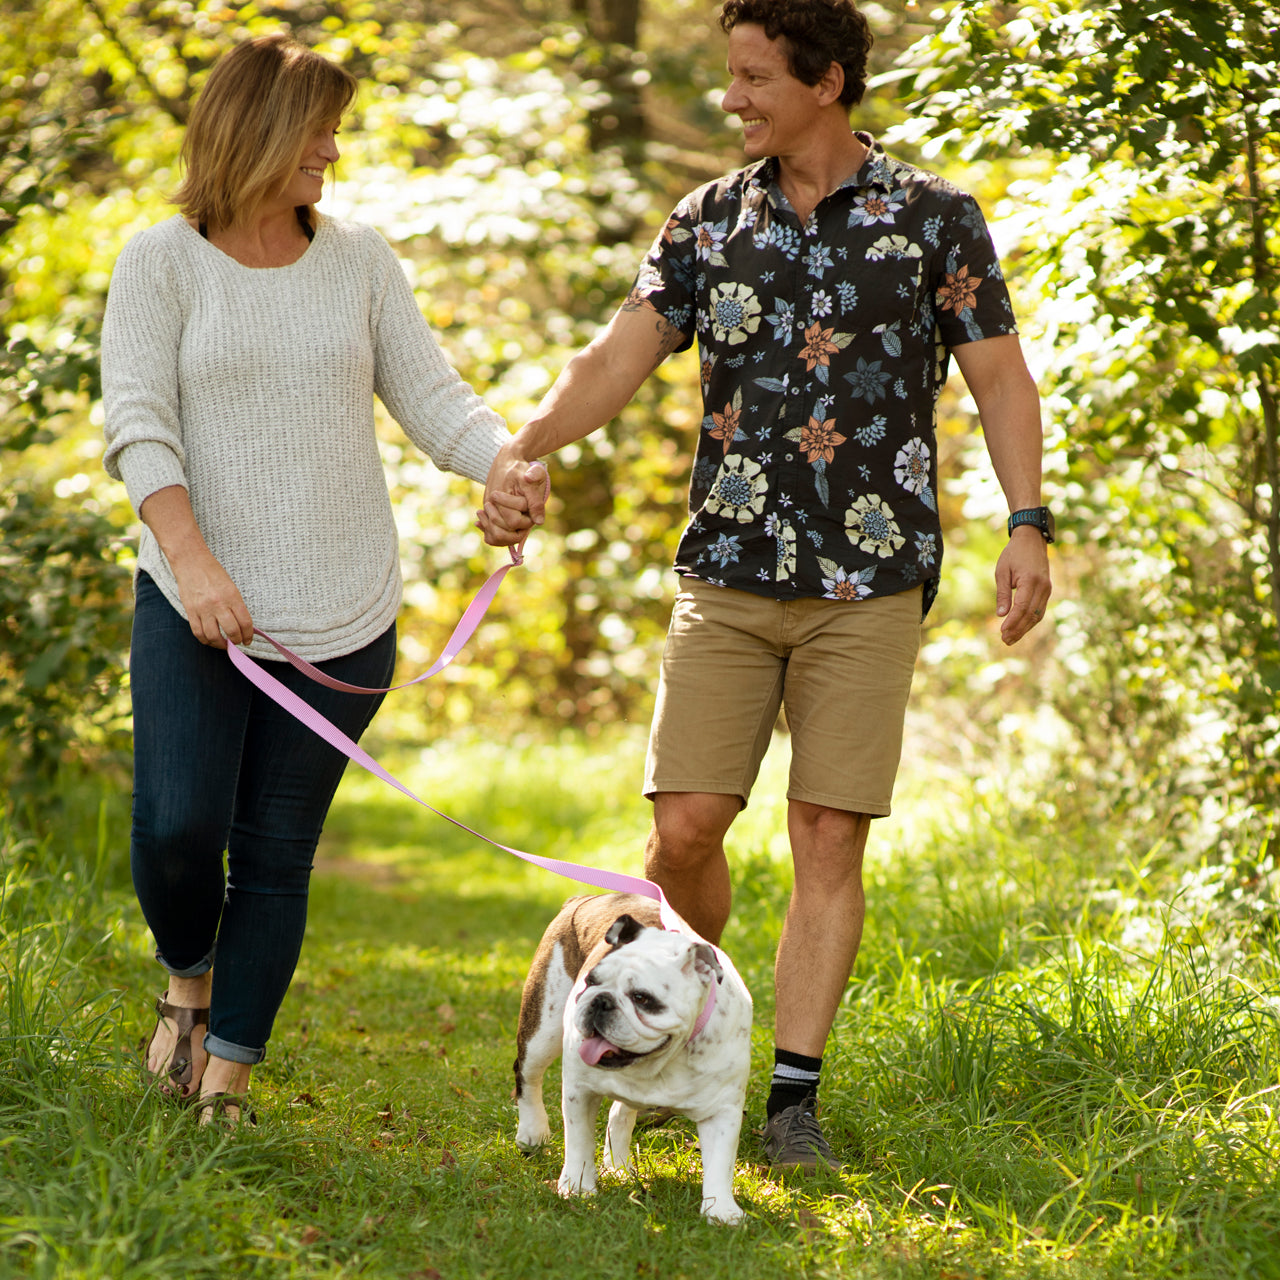 3 Dog Walking Tips You'll Want to Use